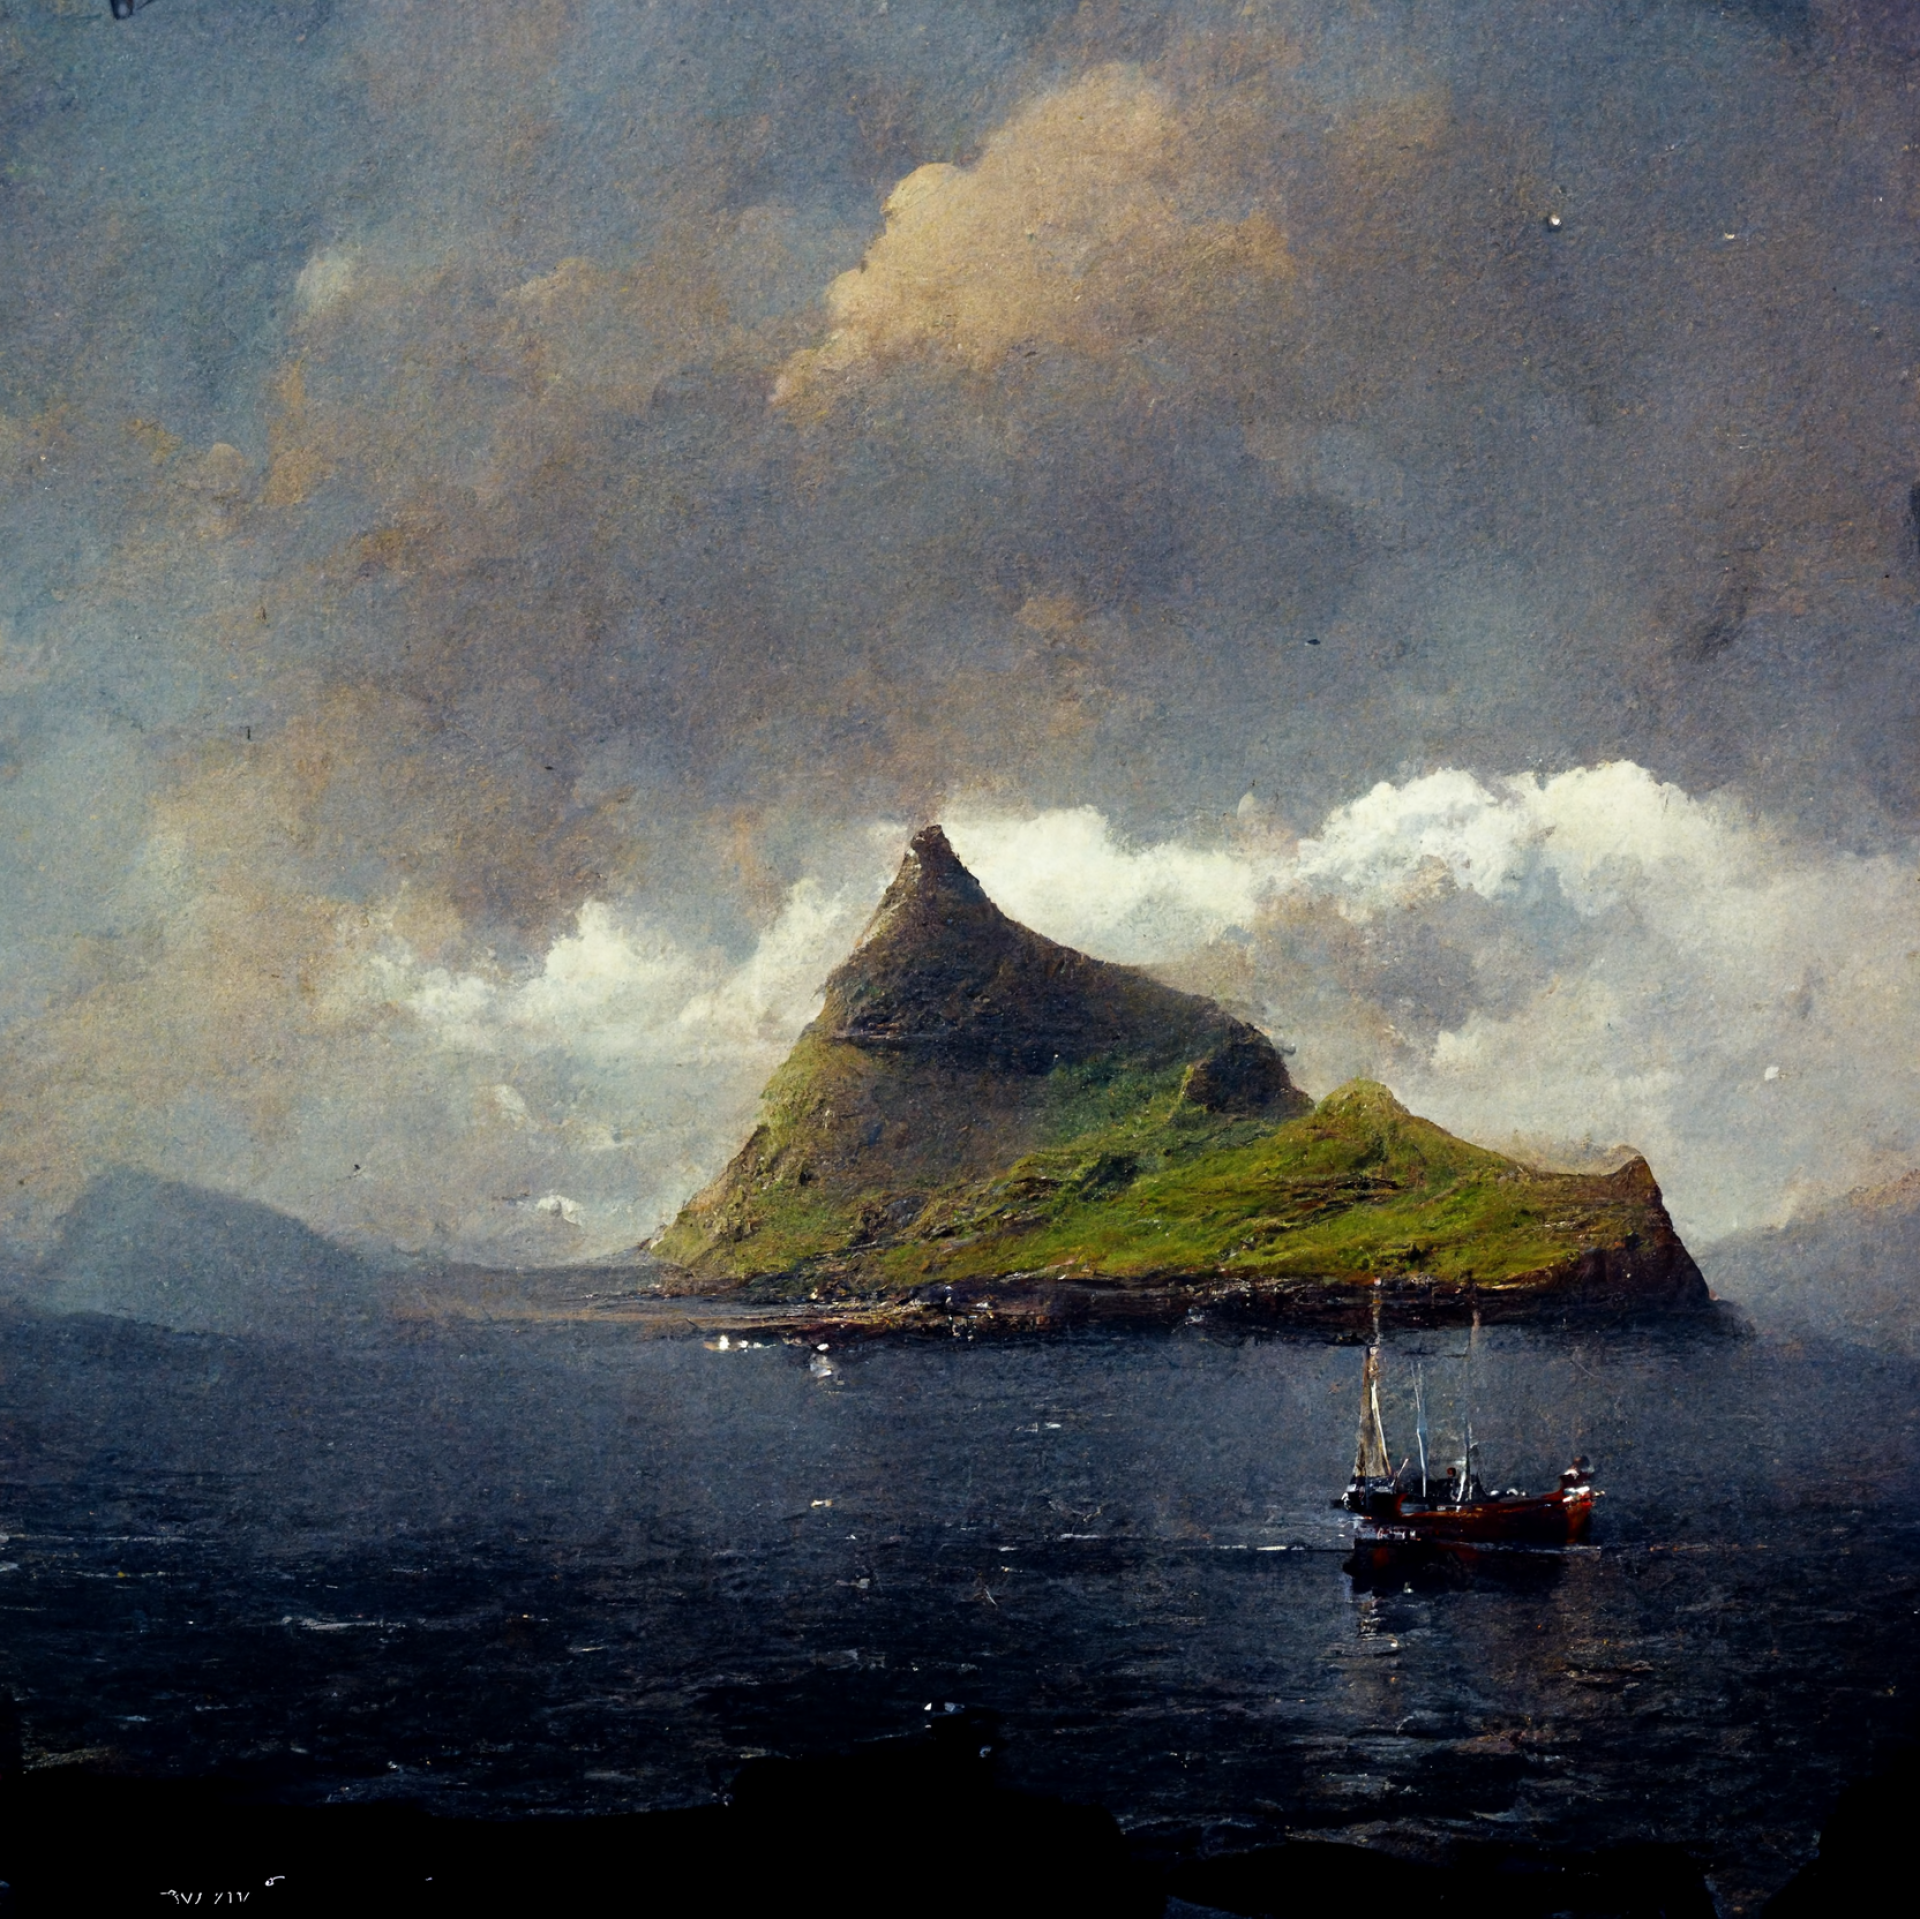 AI-generated image from Midjourney, the Faroe Islands inspired by Ivan Aivazovsky